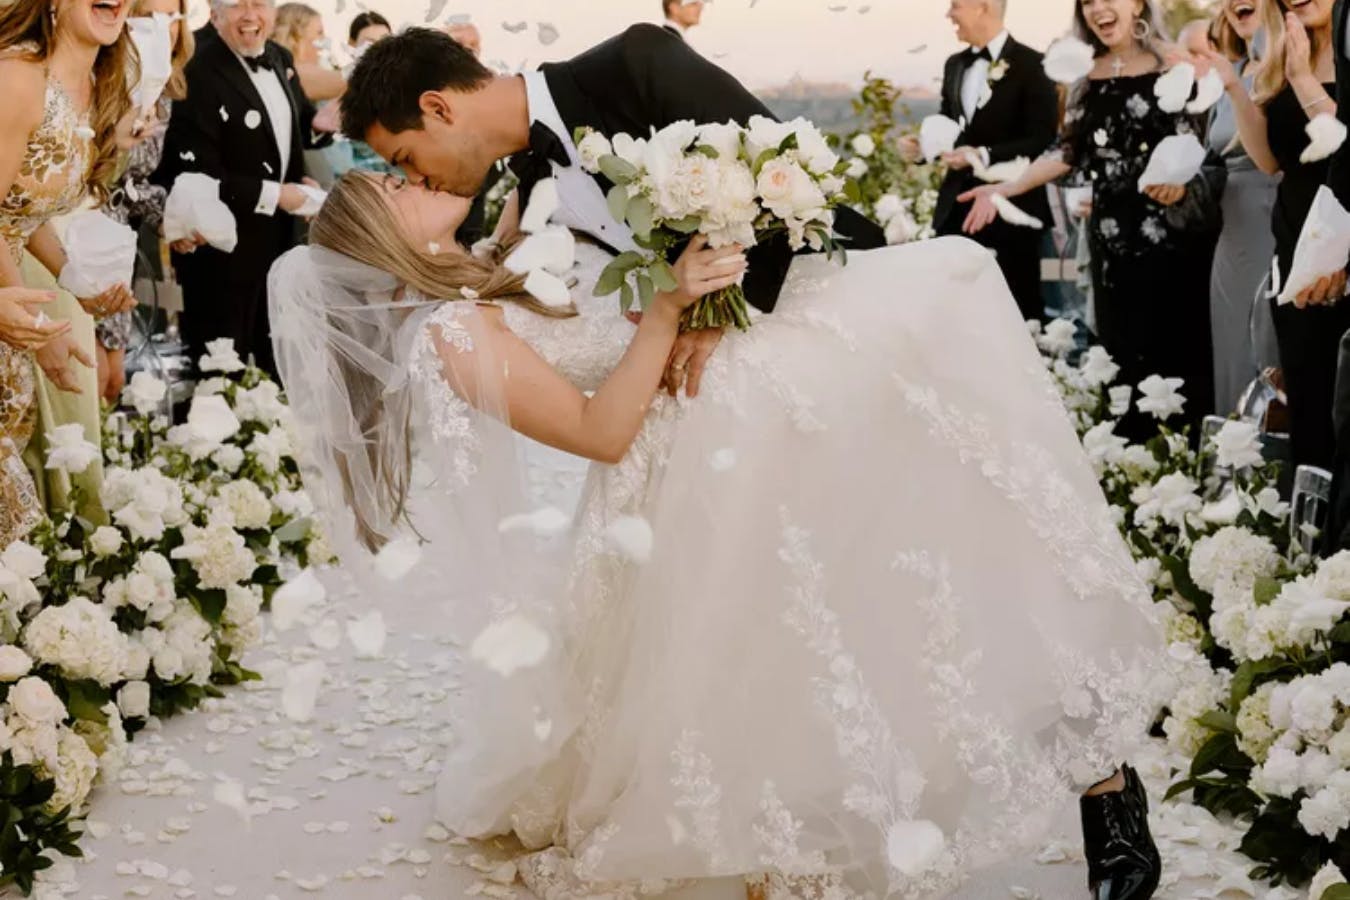 Taylor Dome & Taylor Lautner’s Winery Wedding